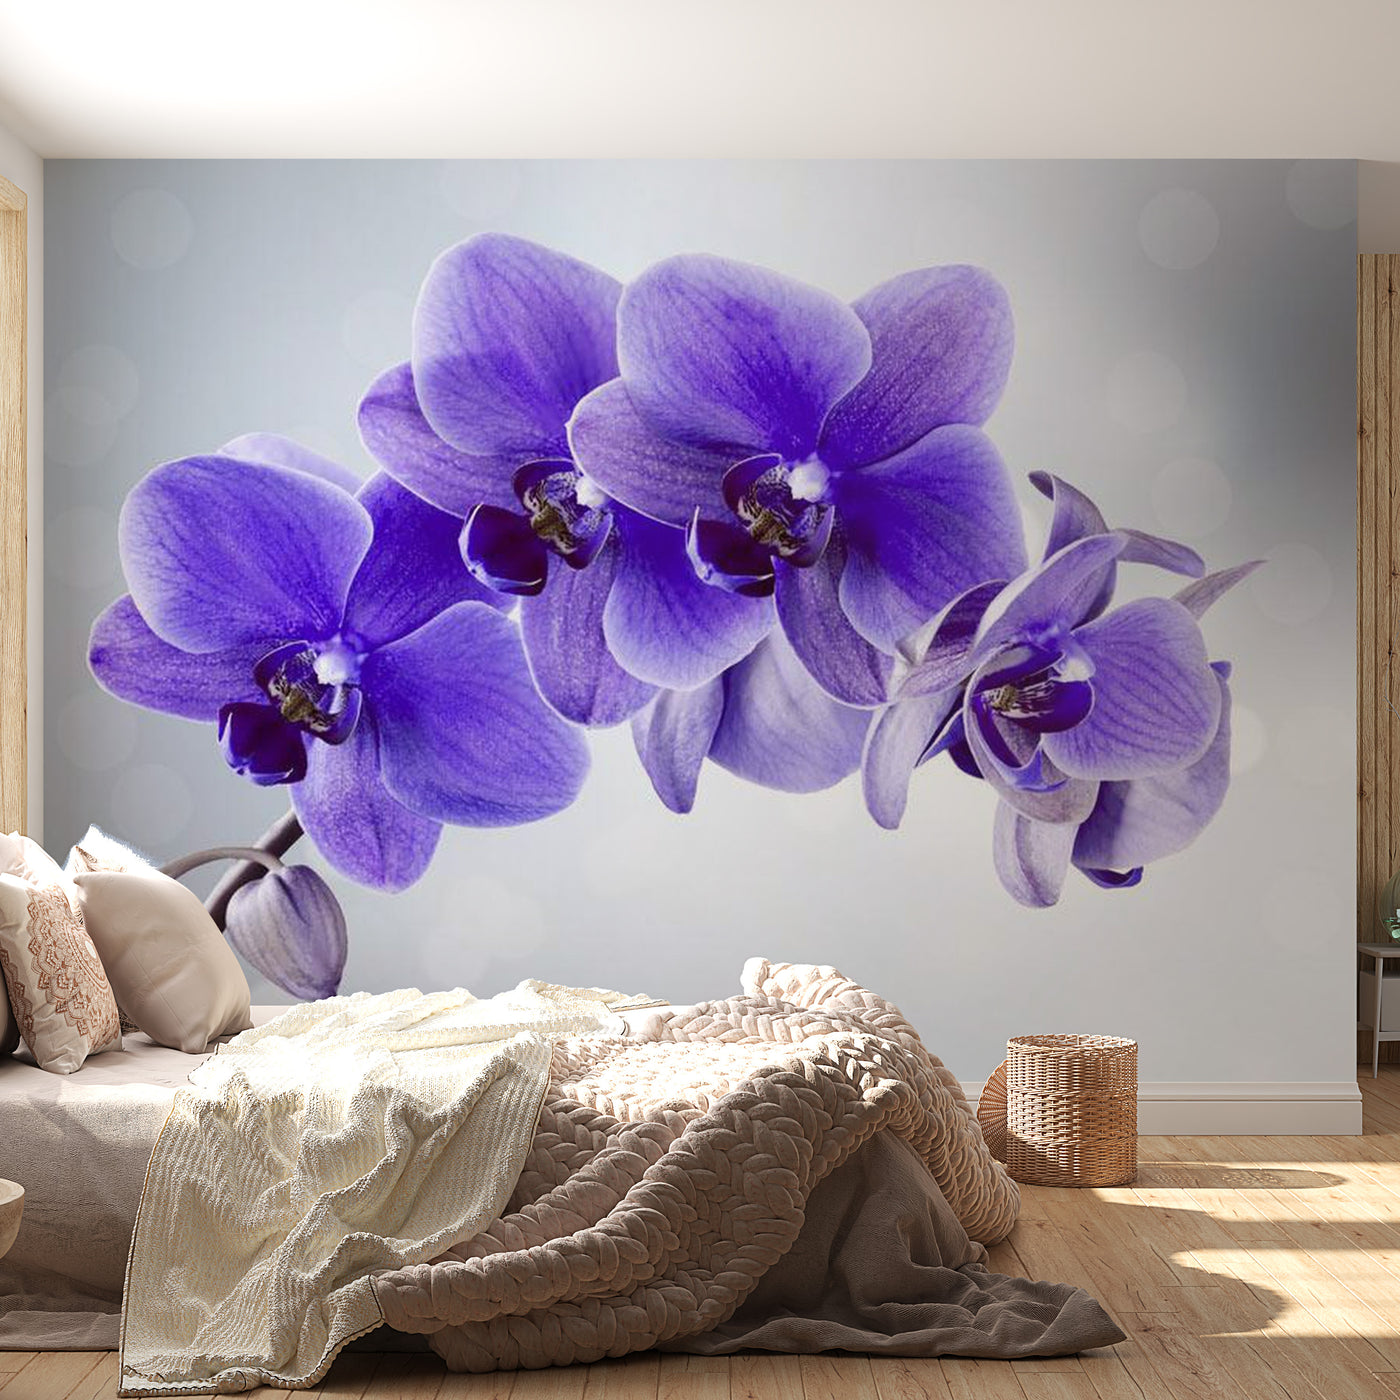 Peel & Stick Floral Wall Mural - Purple Orchid - Removable Wall Decals